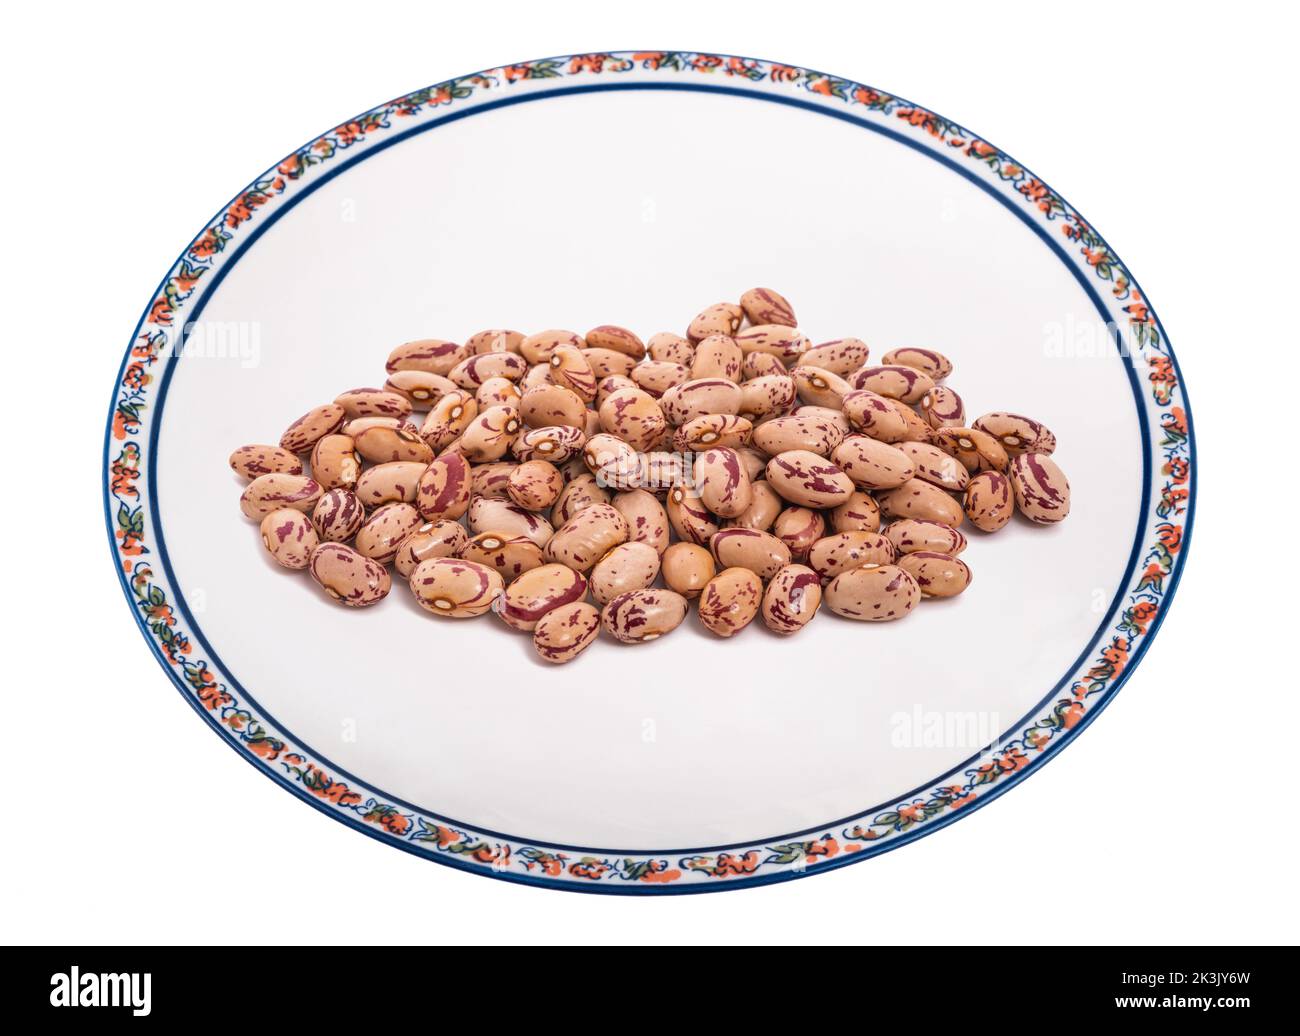 Beans pile in plate isolated on white background Stock Photo